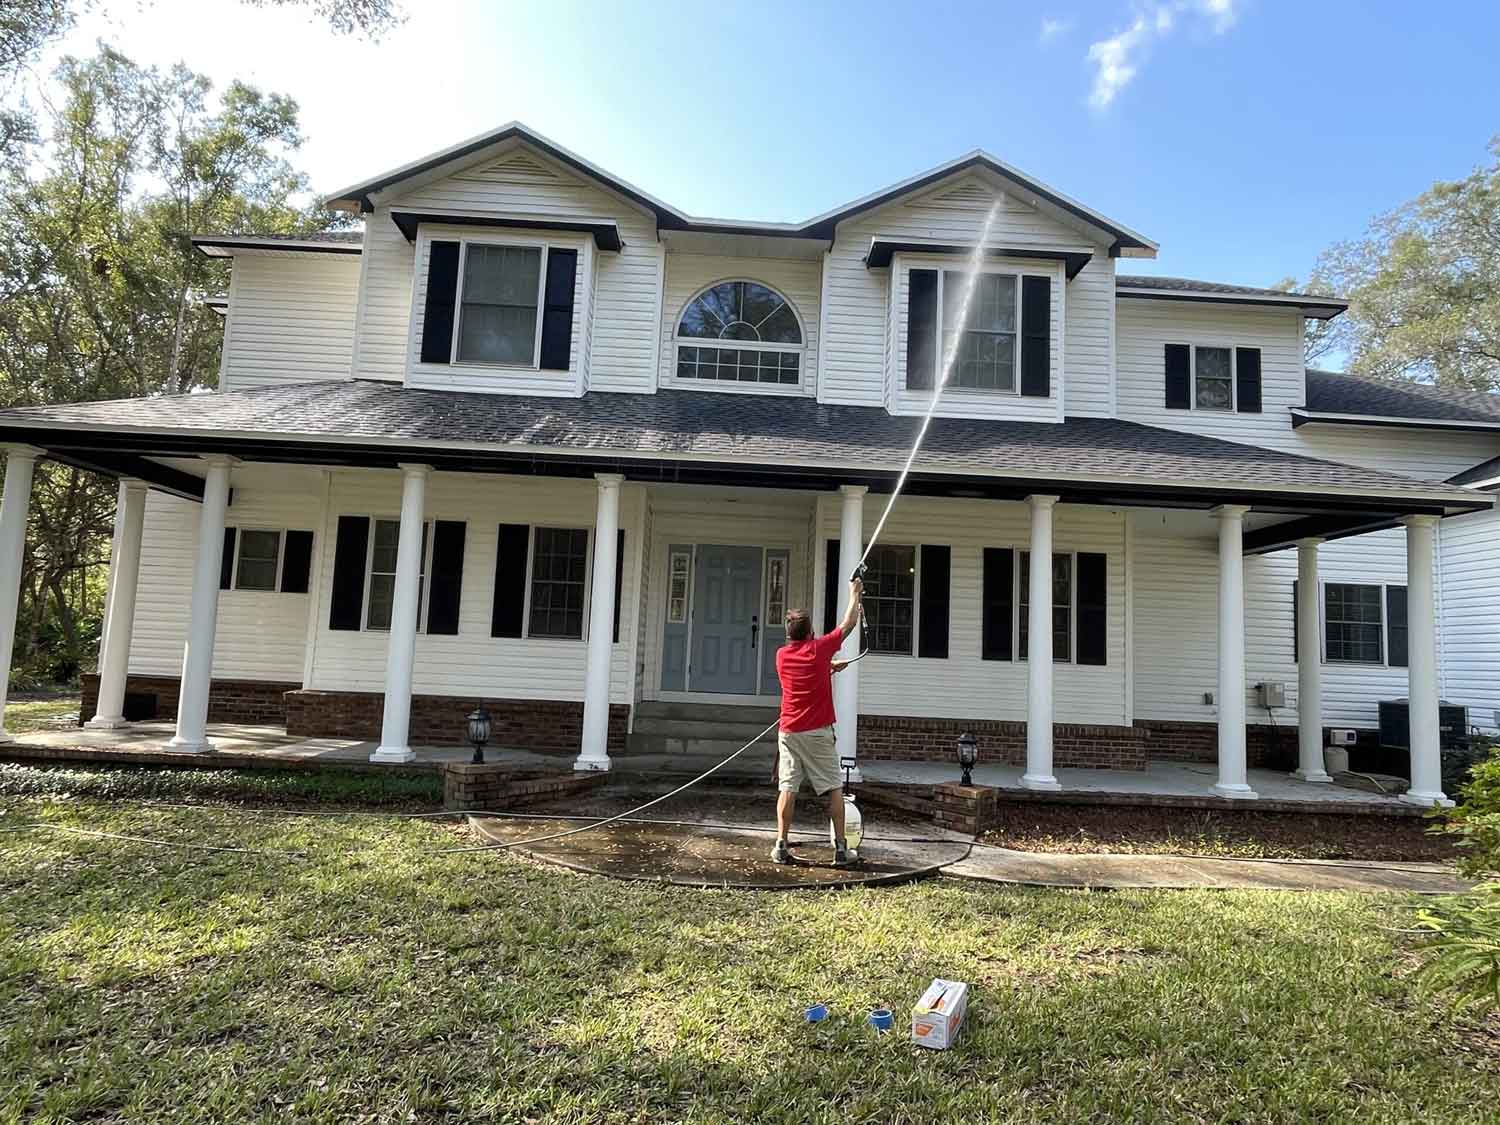 Home Pressure Wash St. Pete & Home Exterior Cleaning in St. Petersburg